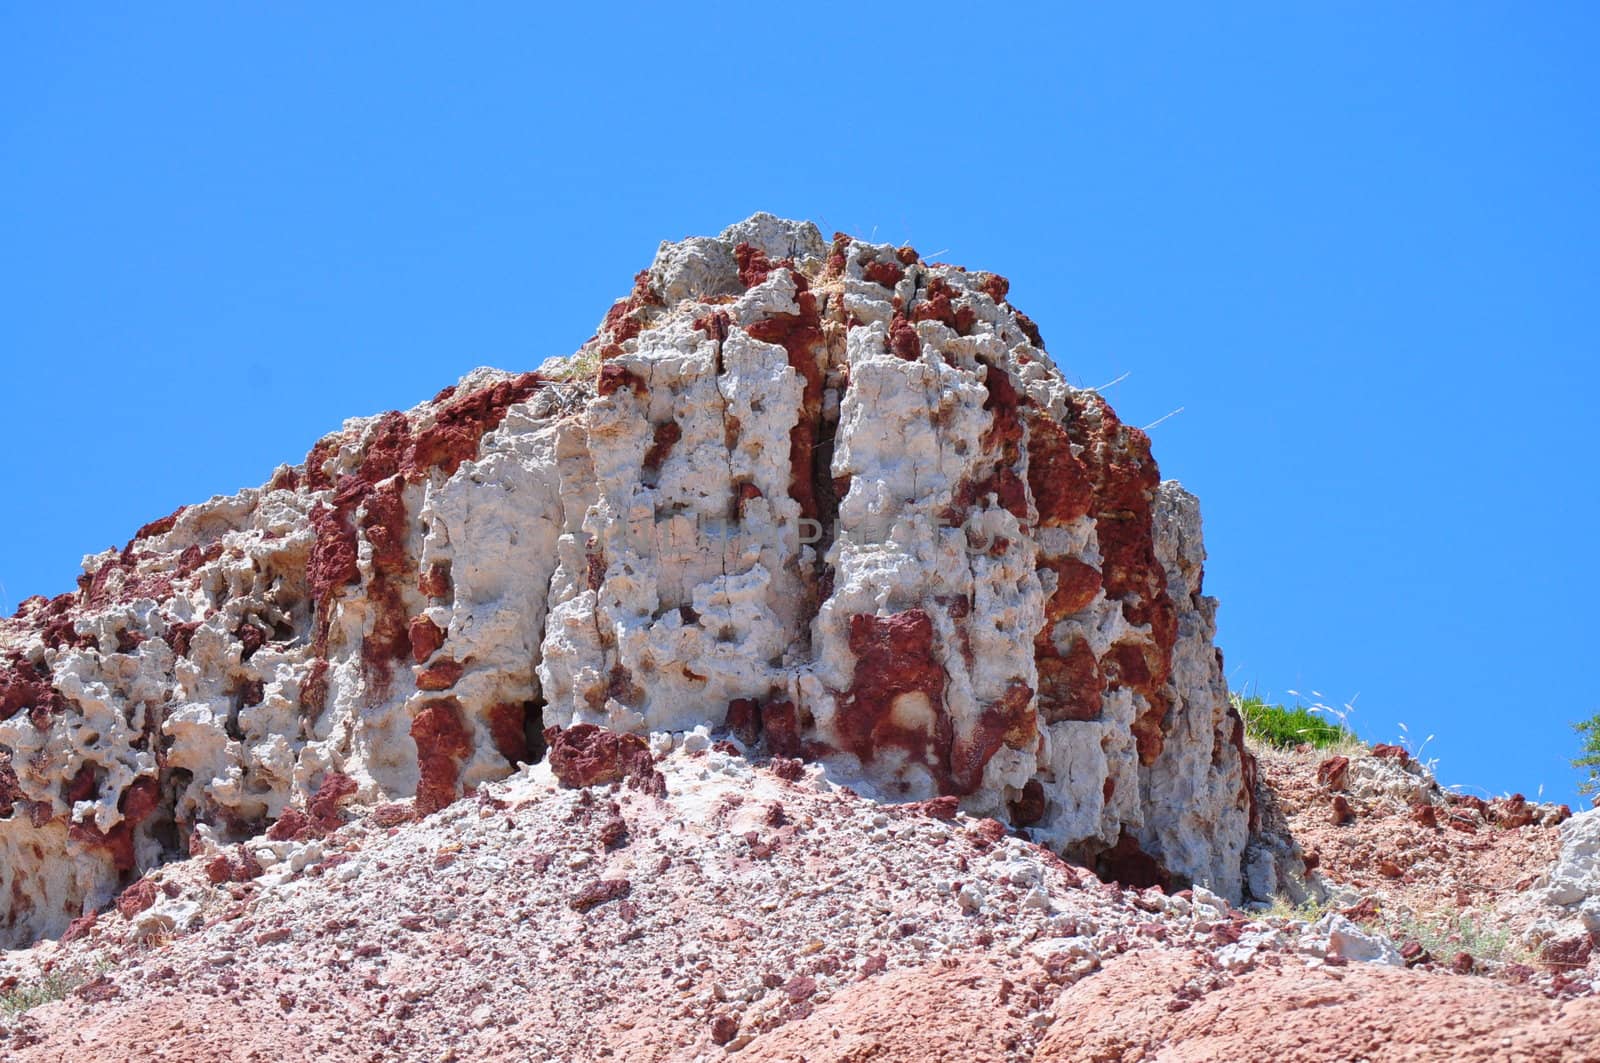 Amazing Rock formation in the Hallett Cove Conservation Park, South Australia.